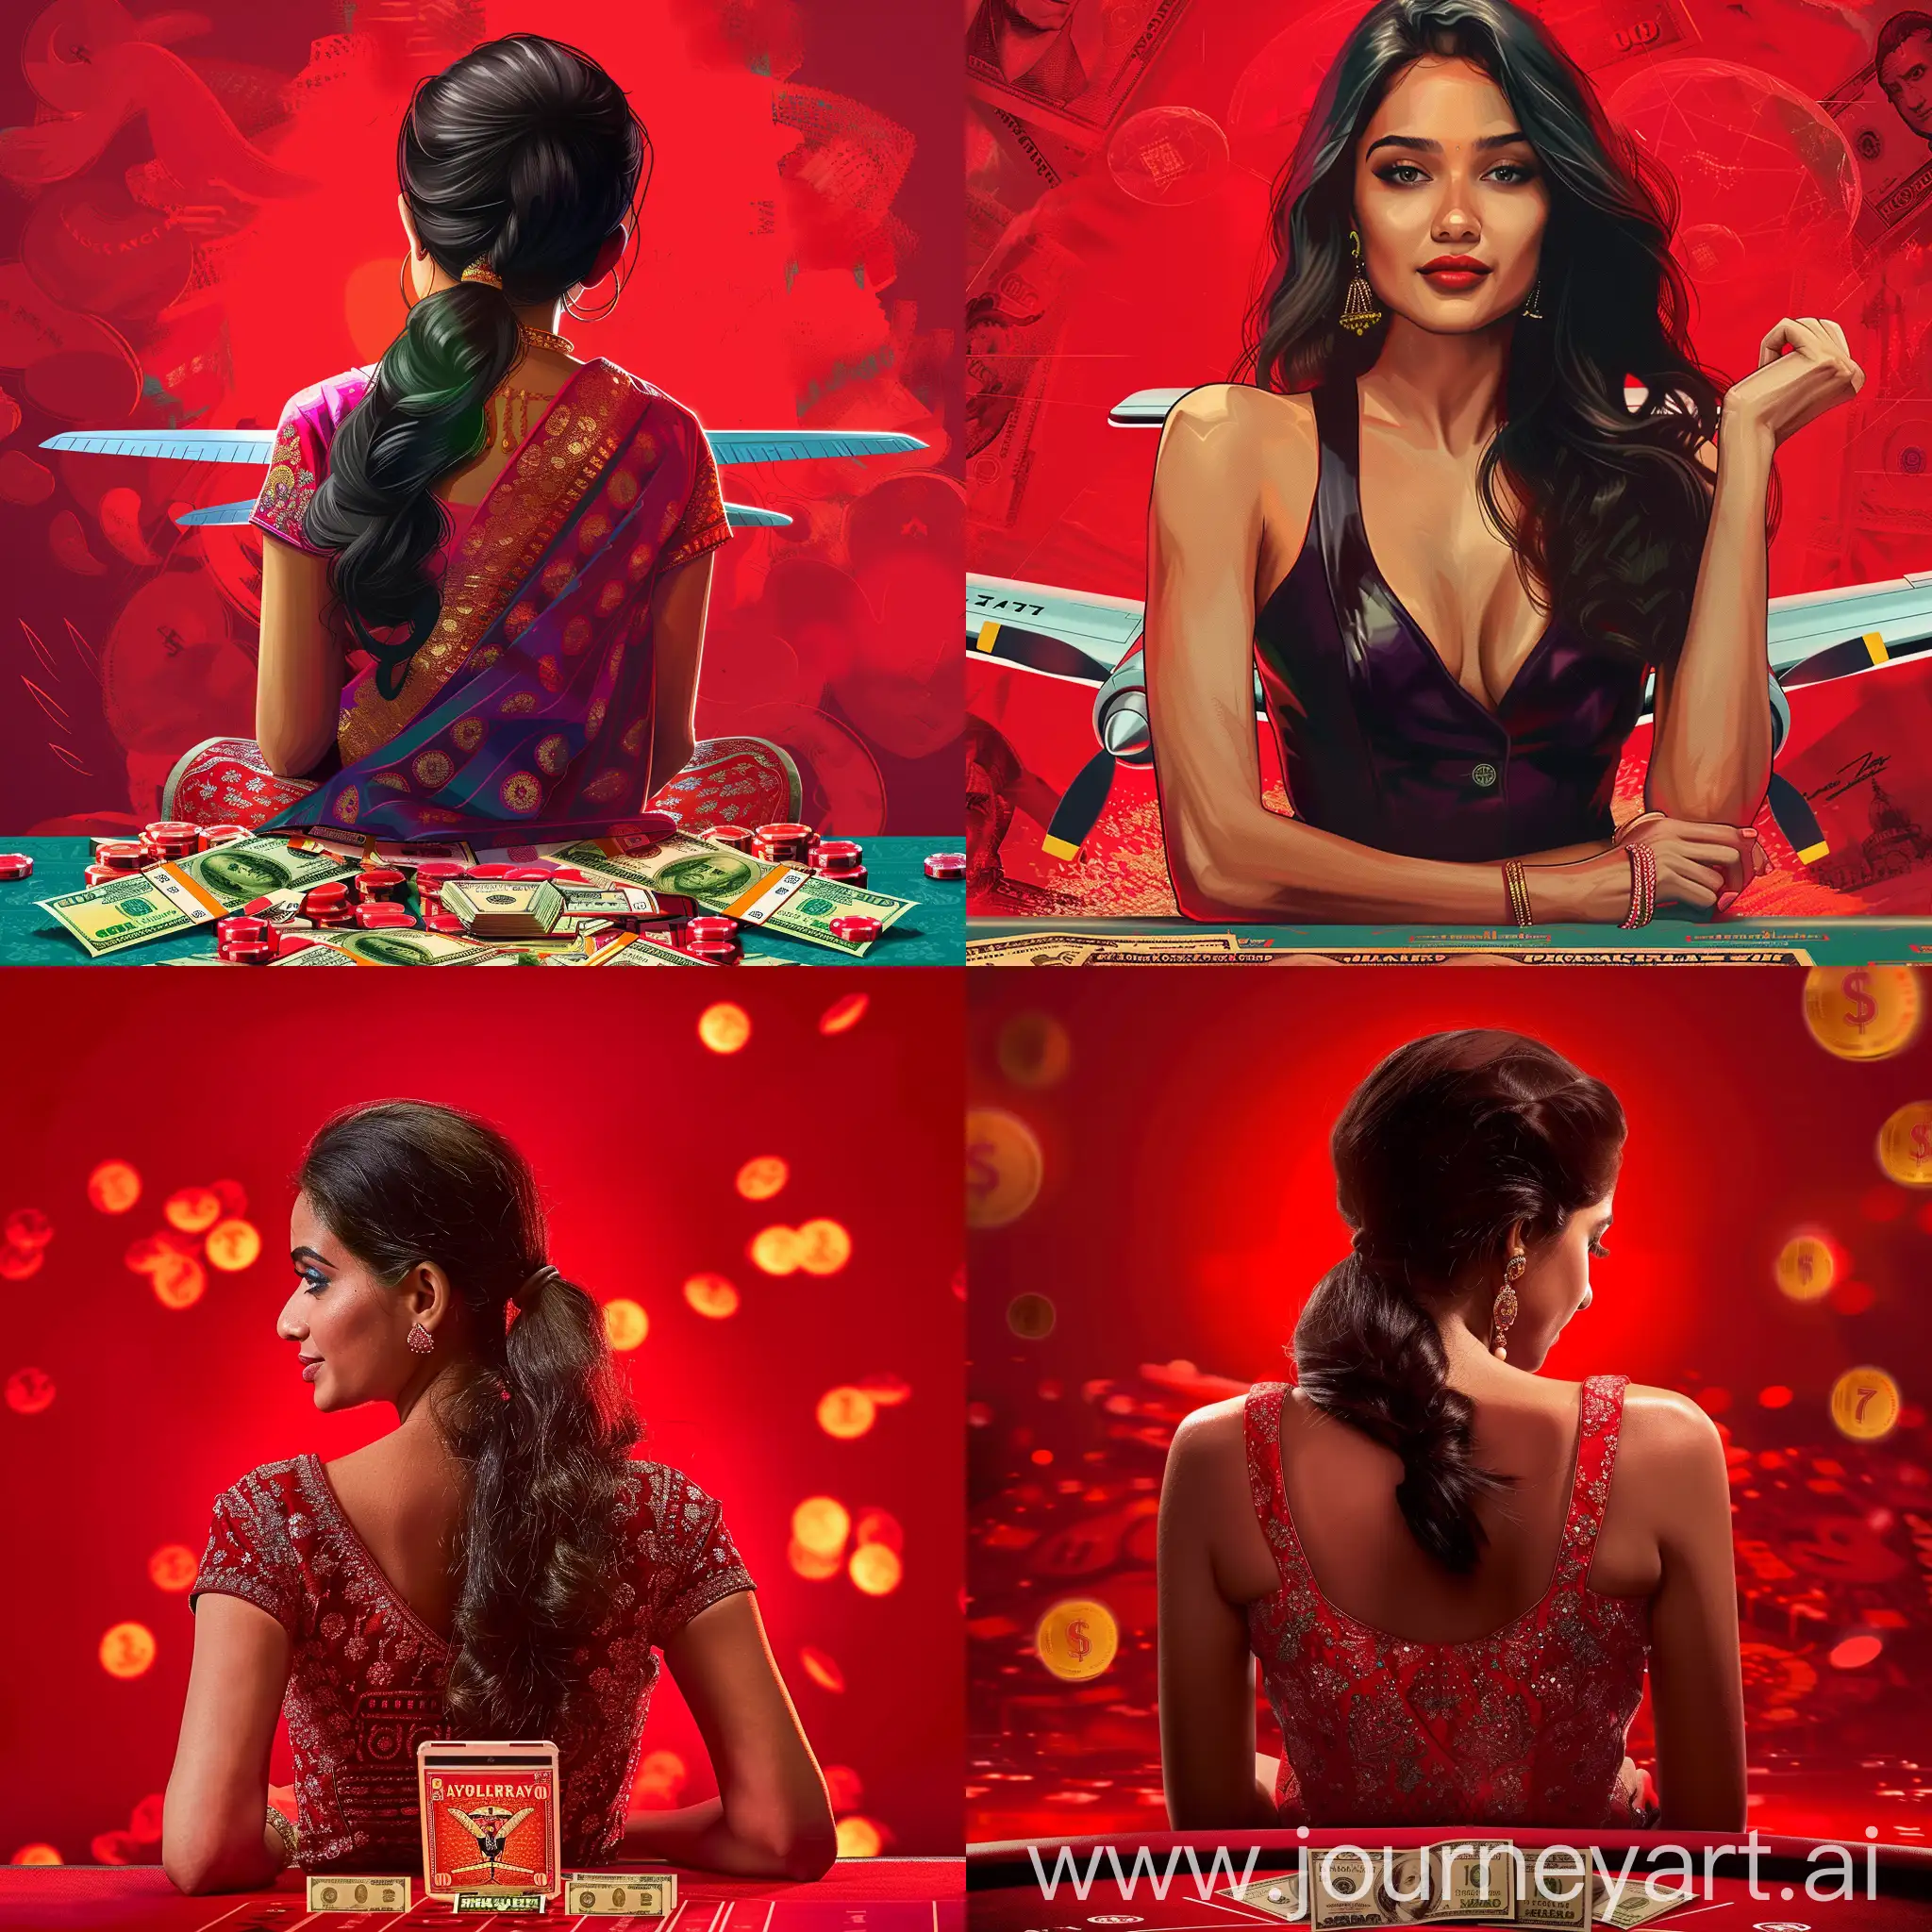 Indian-Girl-Promoting-Aviator-Online-Casino-with-Rupees-Money